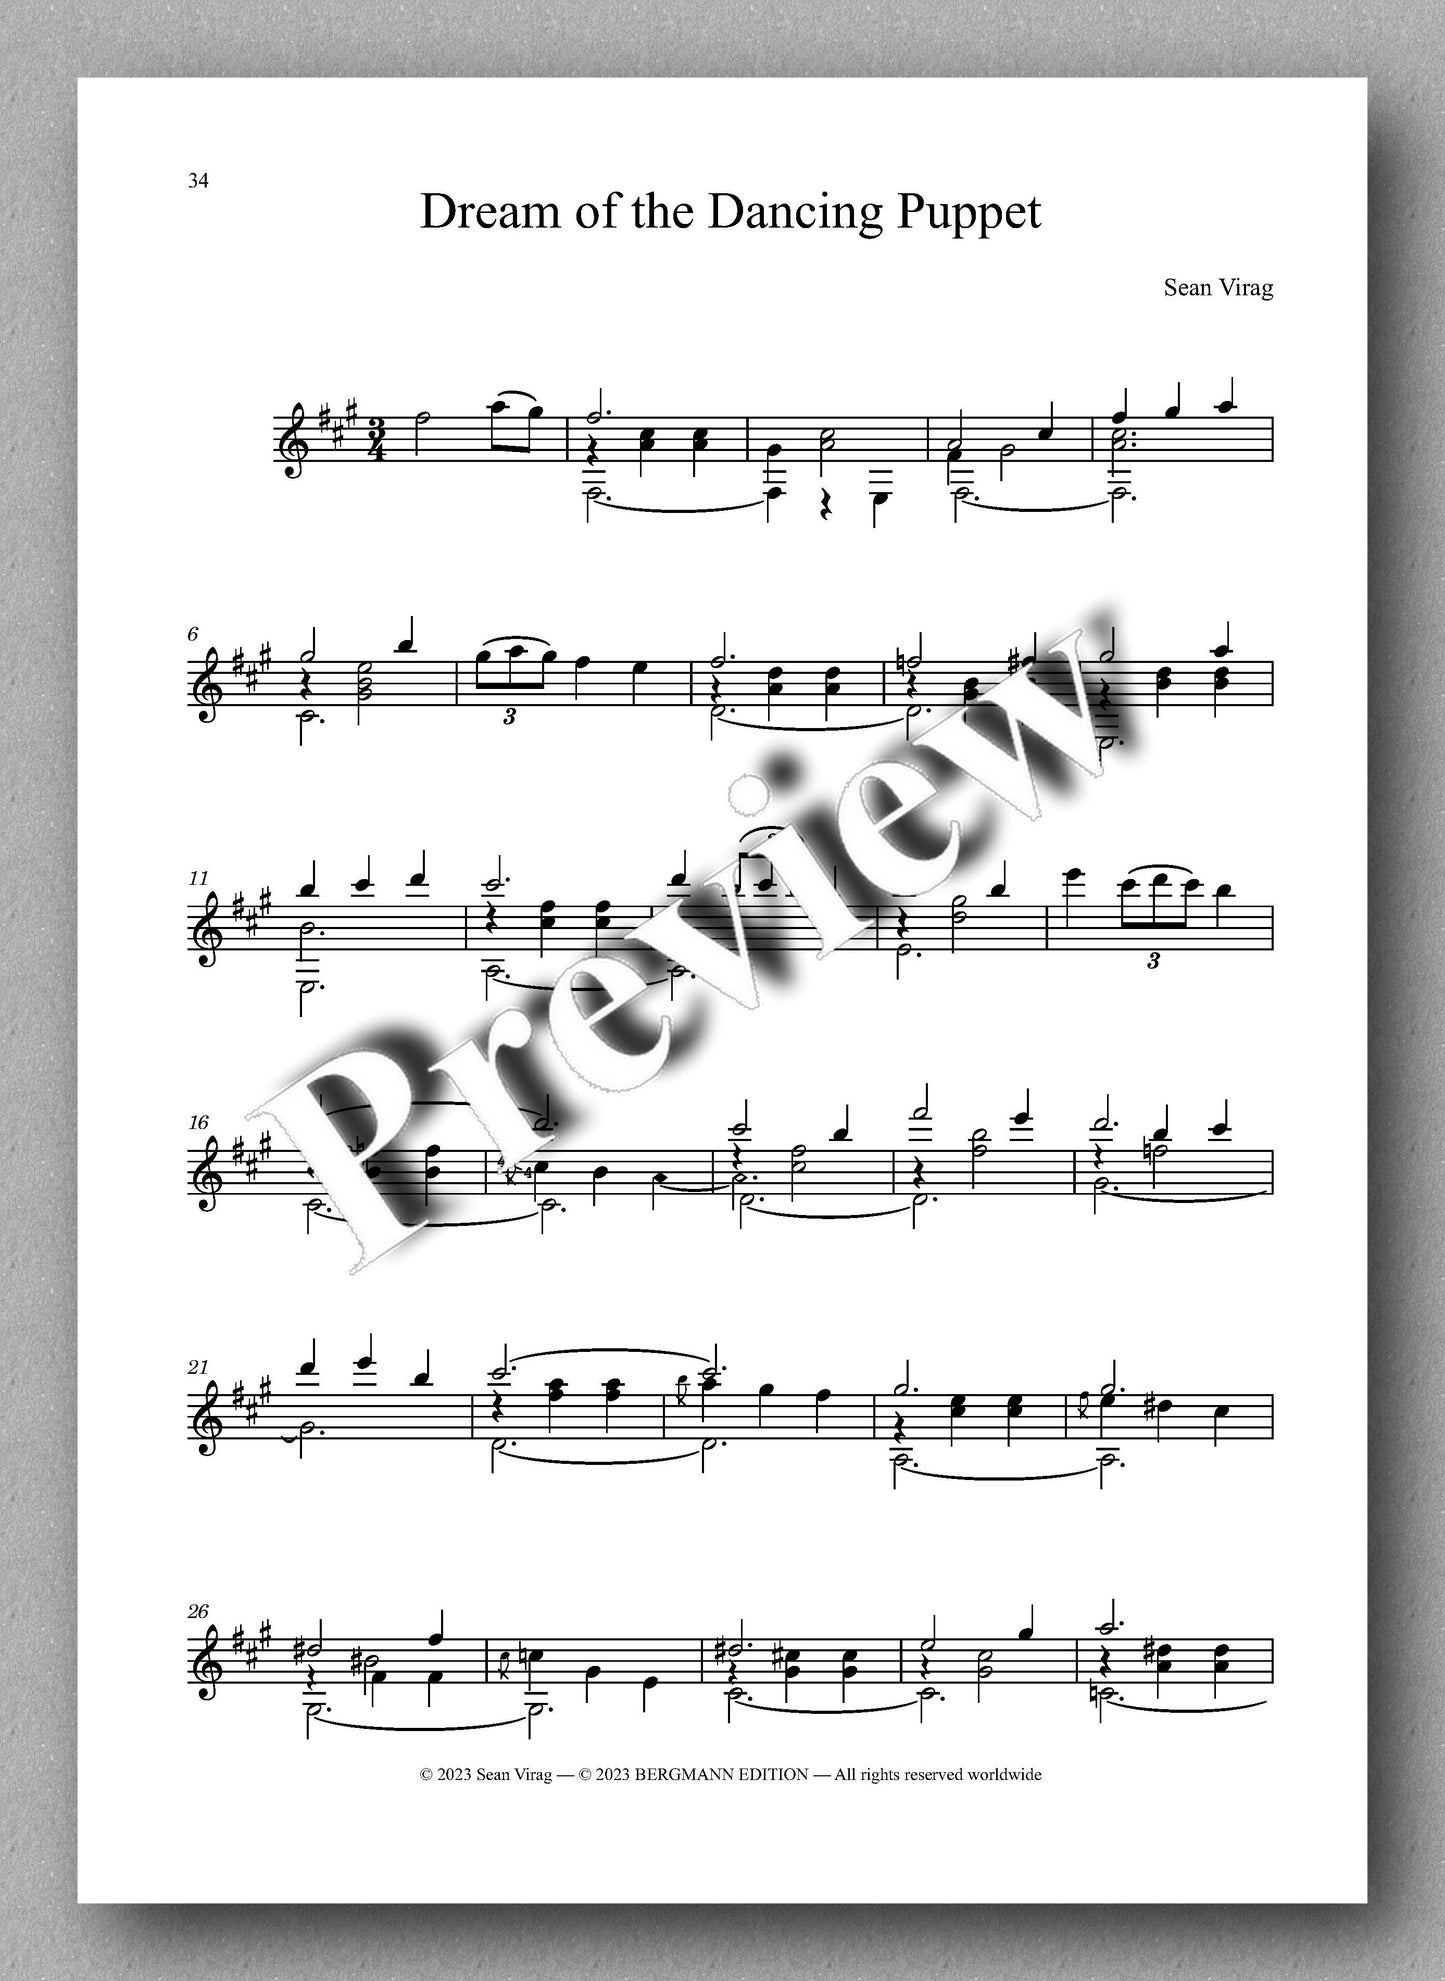 Sean Virag, Ten Pieces for Classical Guitar - preview of the music score 4